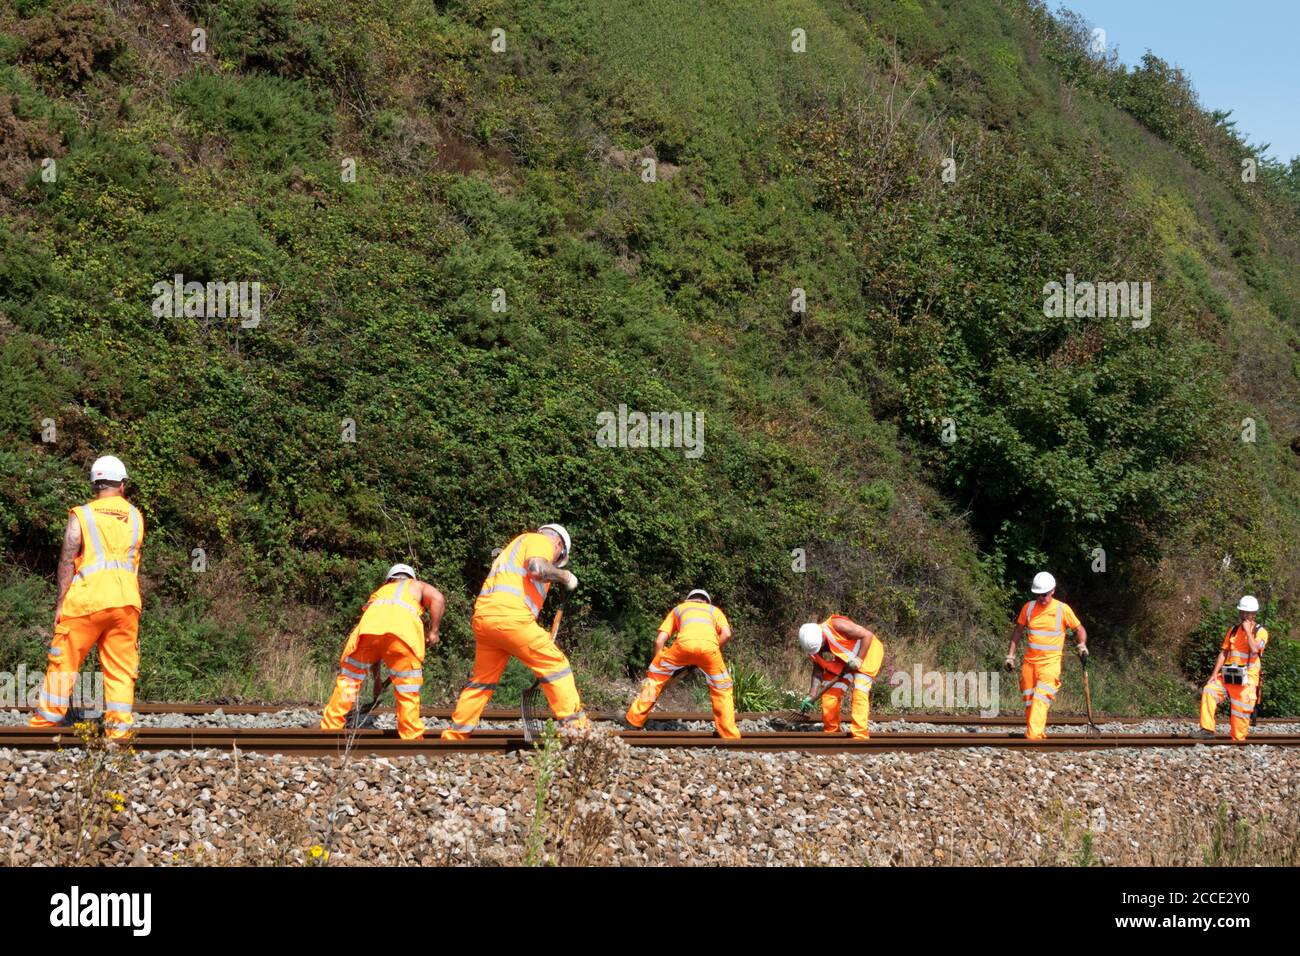 A group, or gang, or Netwok Rail workers carrying out maintenance work on a live railway track. The men are clearing debris from the track using rakes Stock Photo